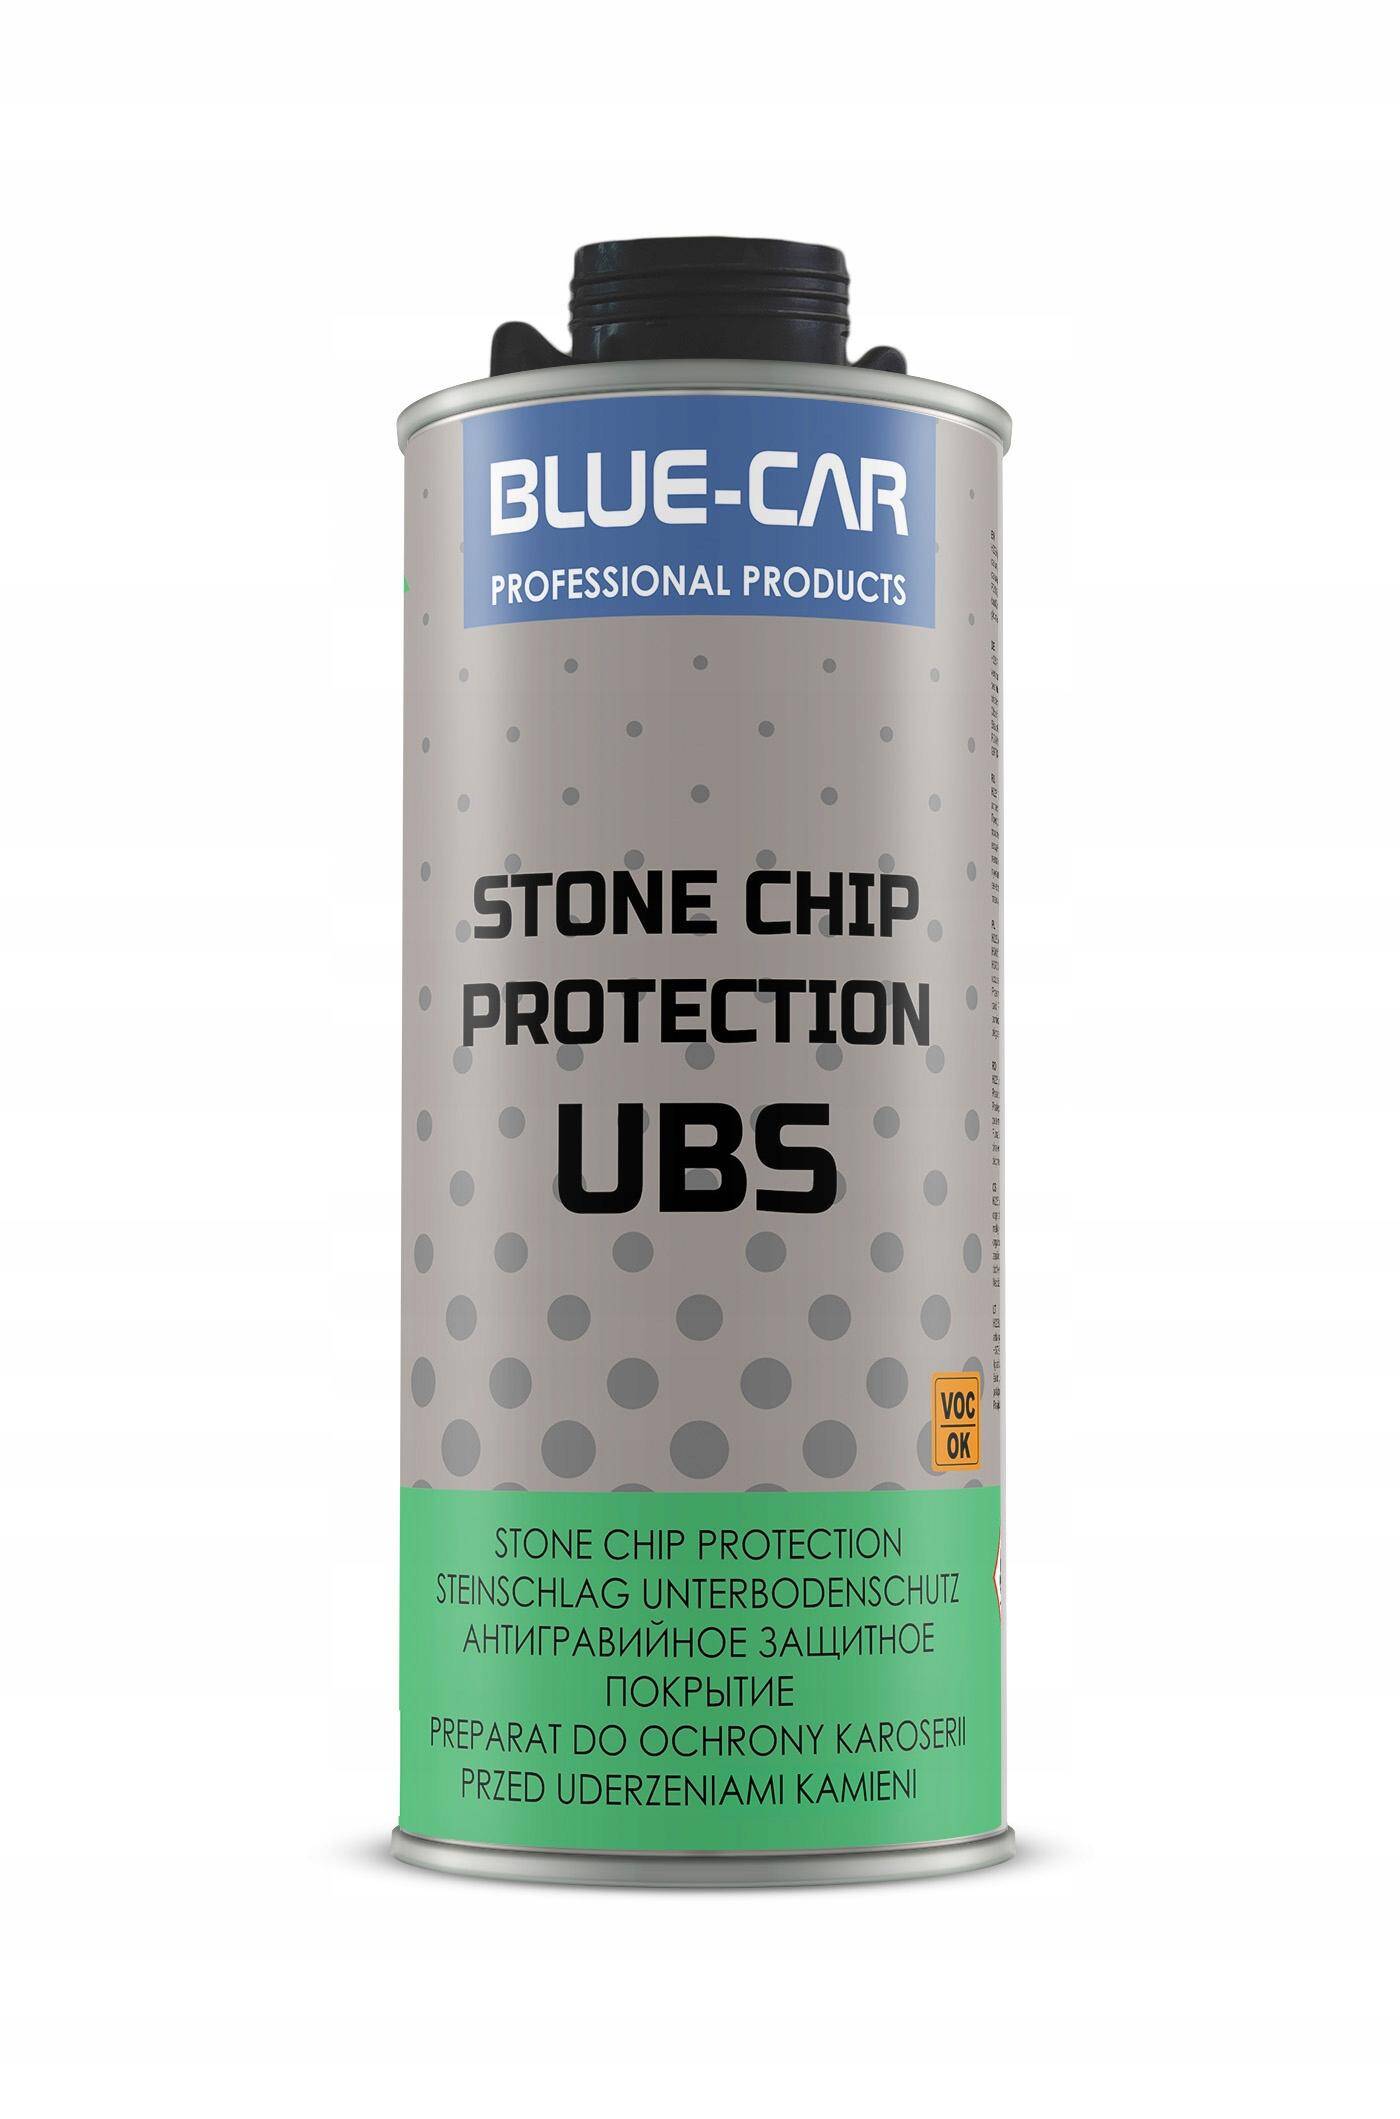 BLUE CAR STONE CHIP PROTECTION UBS 1 KG